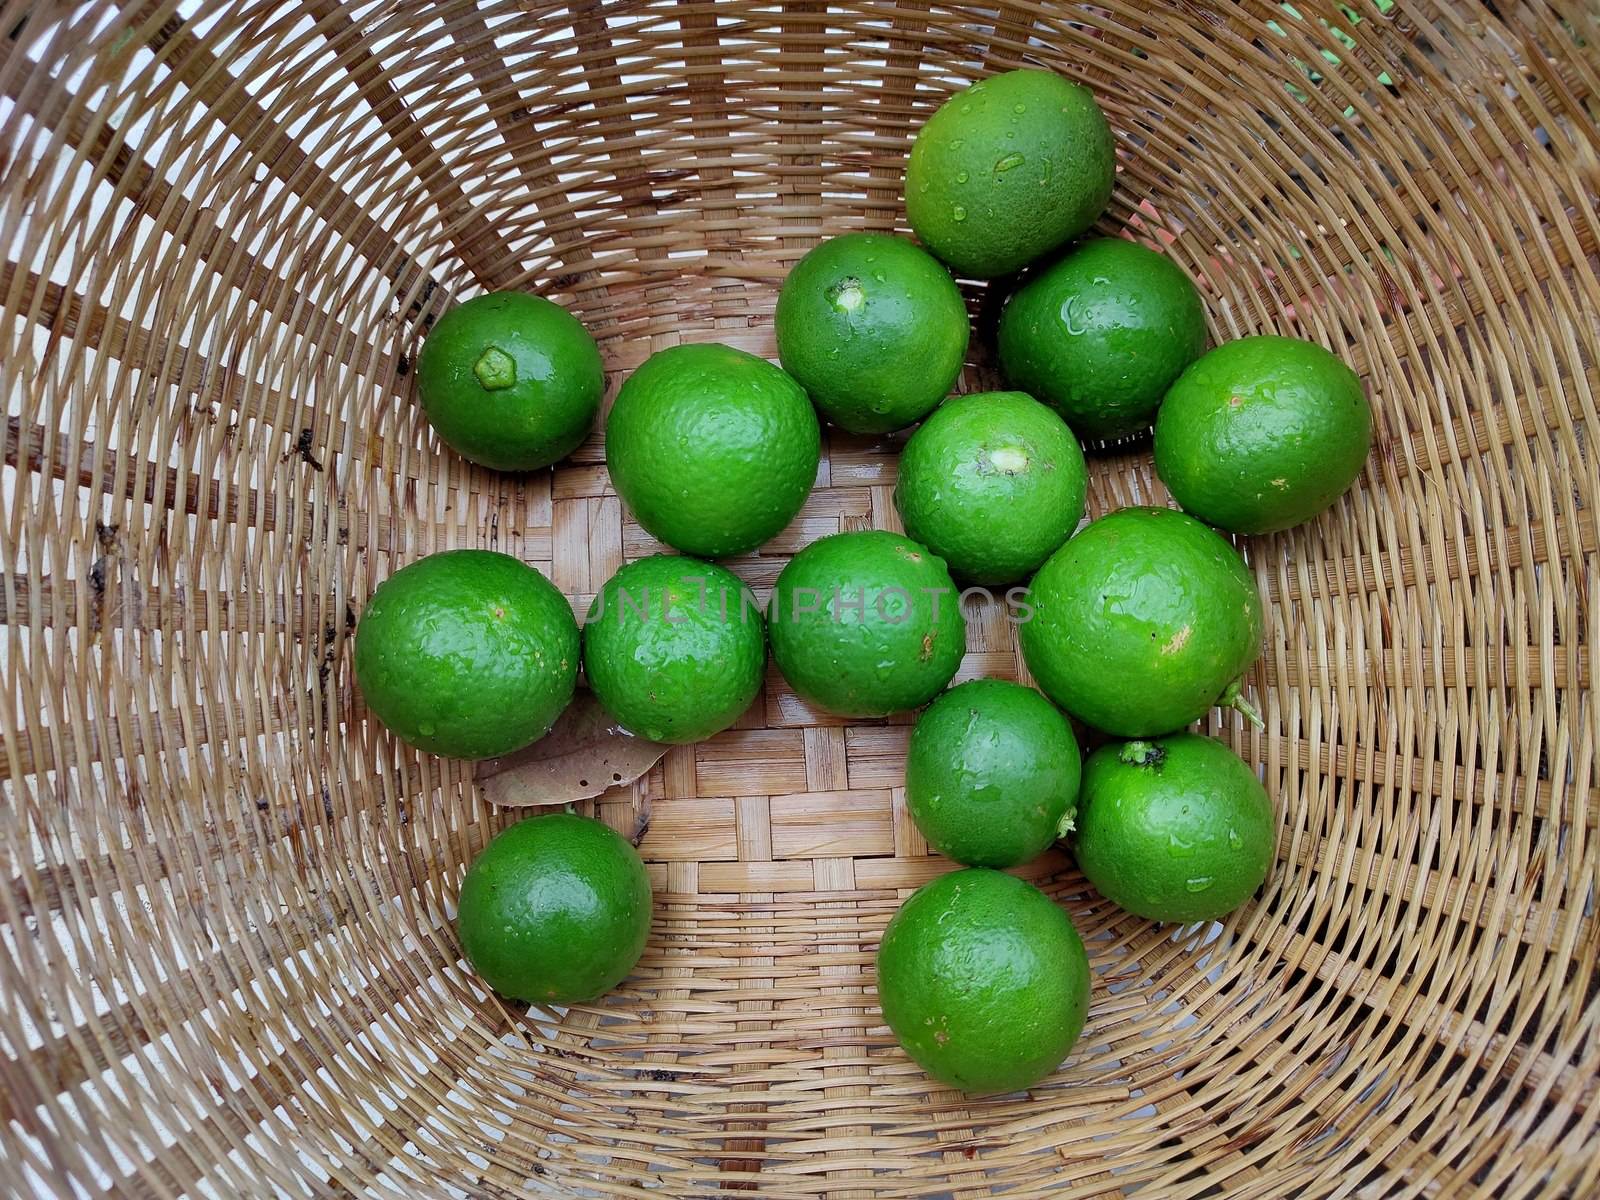 Fresh green limes in the small colorful baskets on the woven bamboo plate. The Thai traditional fresh market. by peerapixs